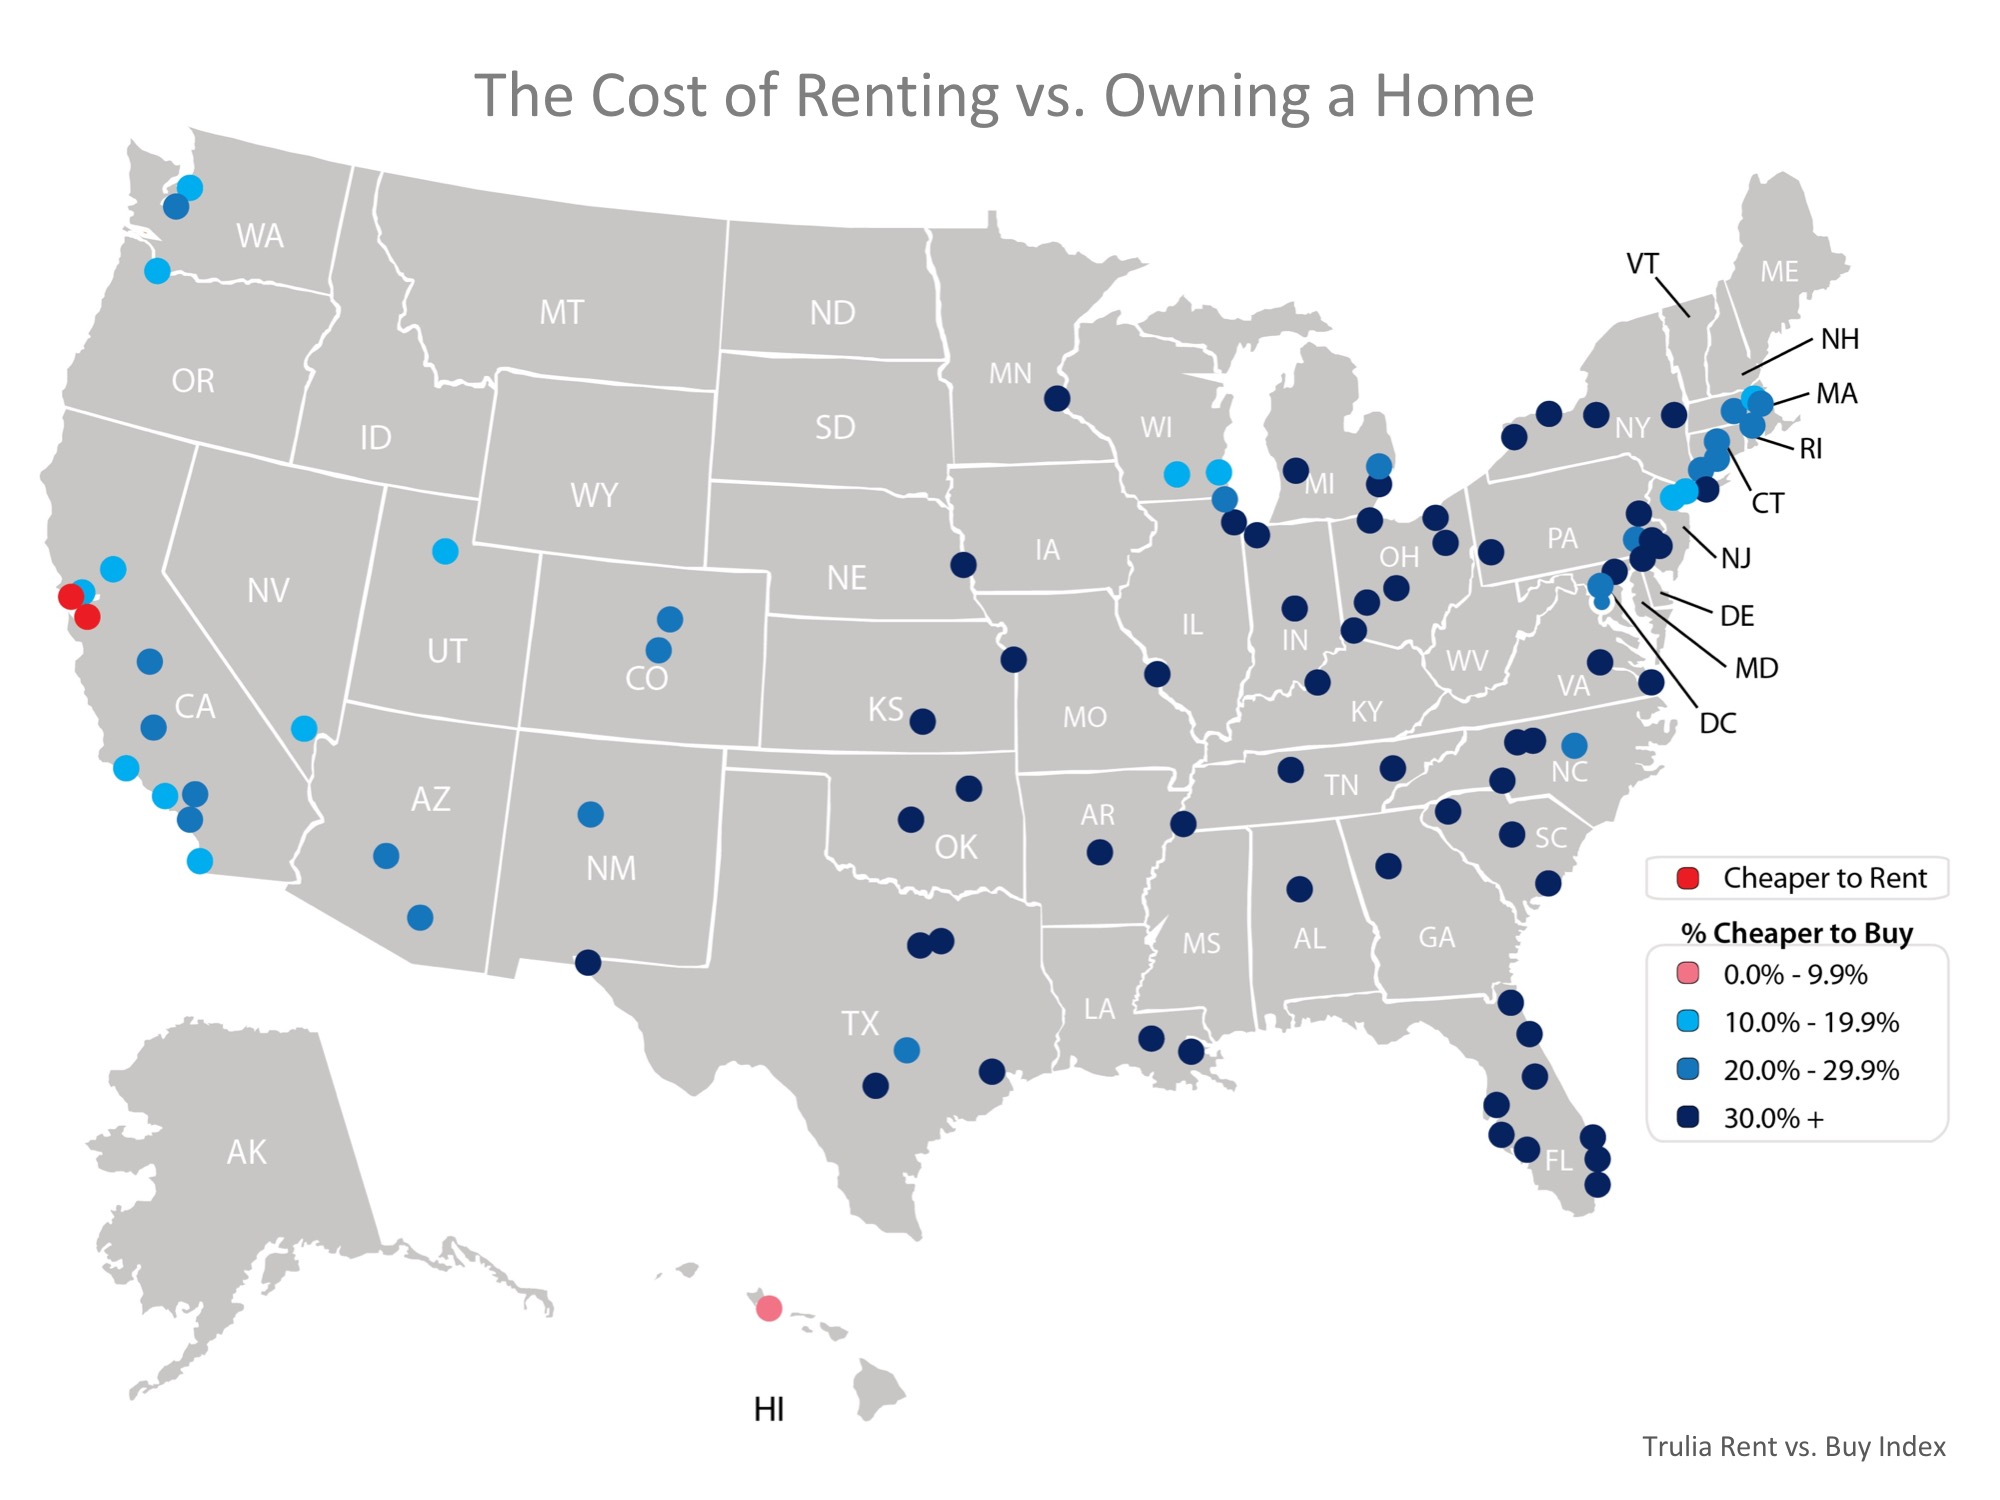 Buying Is Now 26.3% Cheaper Than Renting in the US